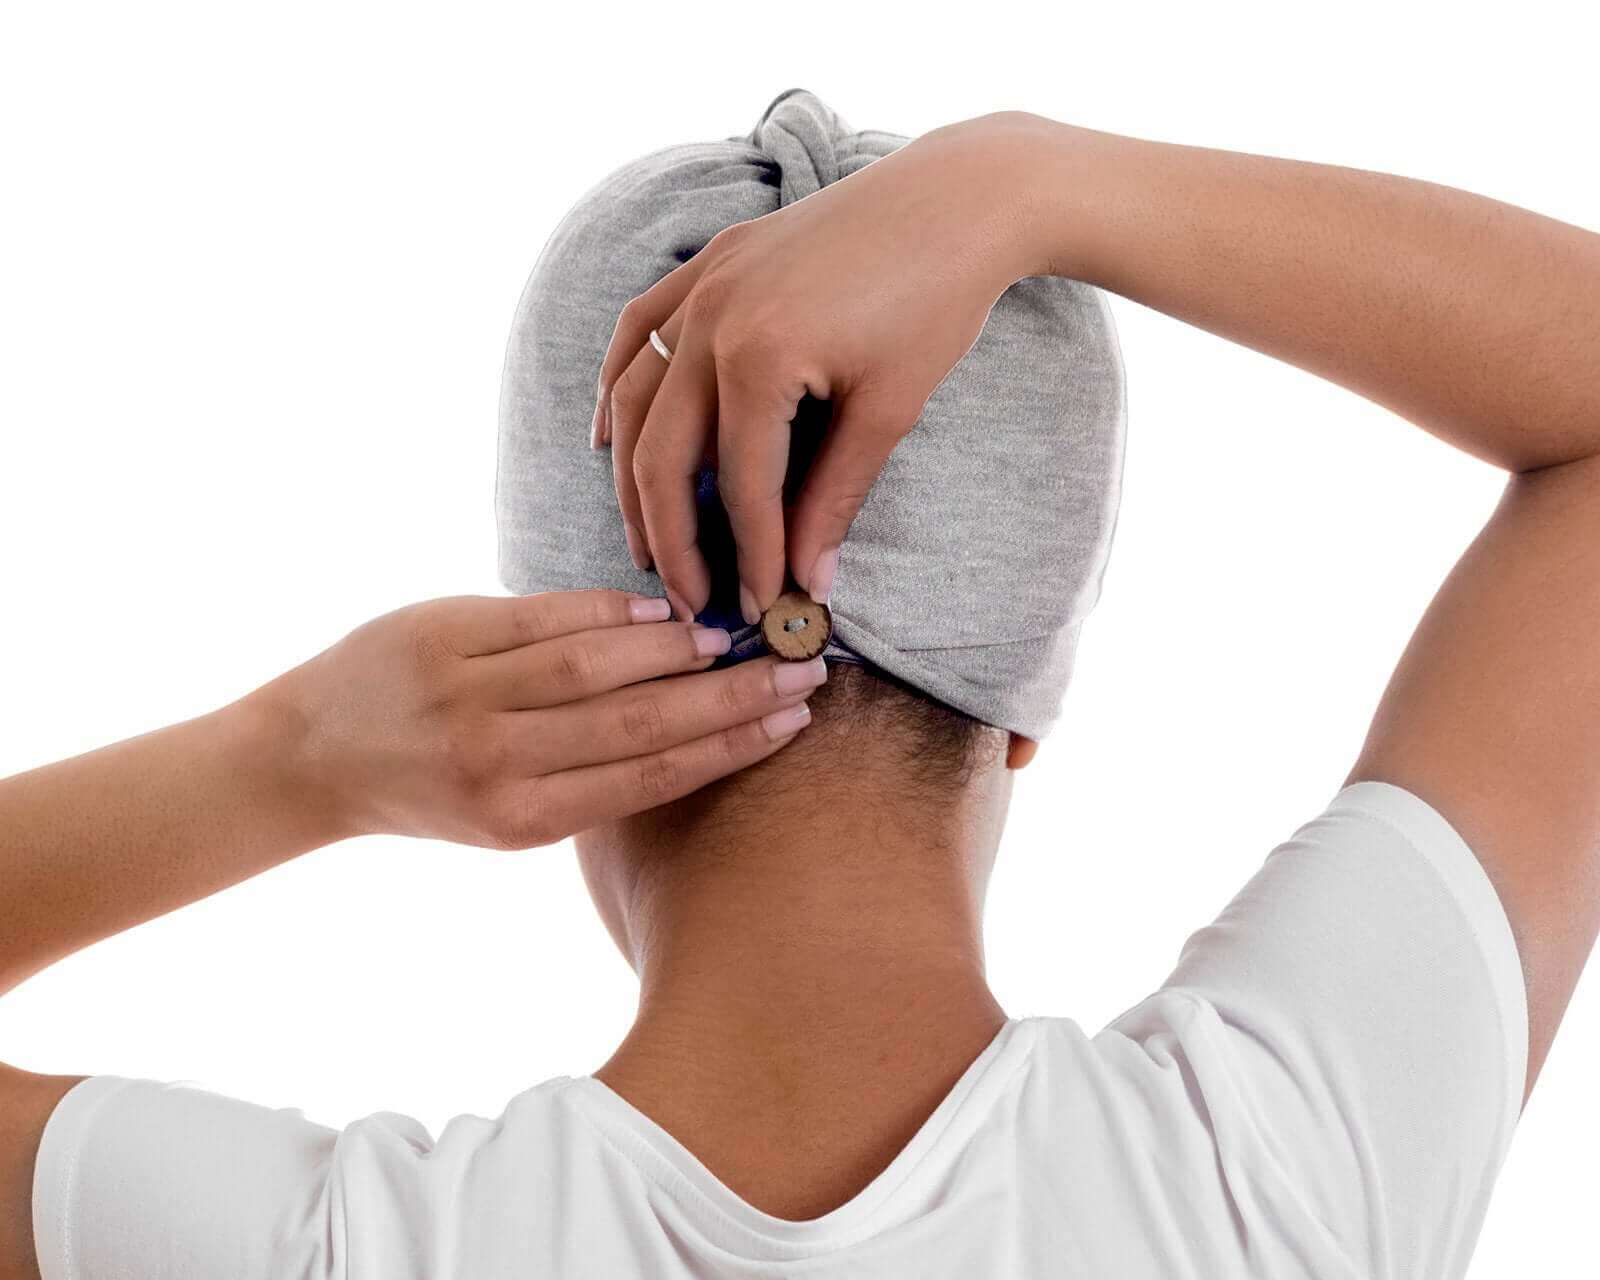 Heather Gray T-Shirt Hair Towel Hood for Curly, Wavy, and Straight Hair - Soft, Absorbent, and Eco-Friendly